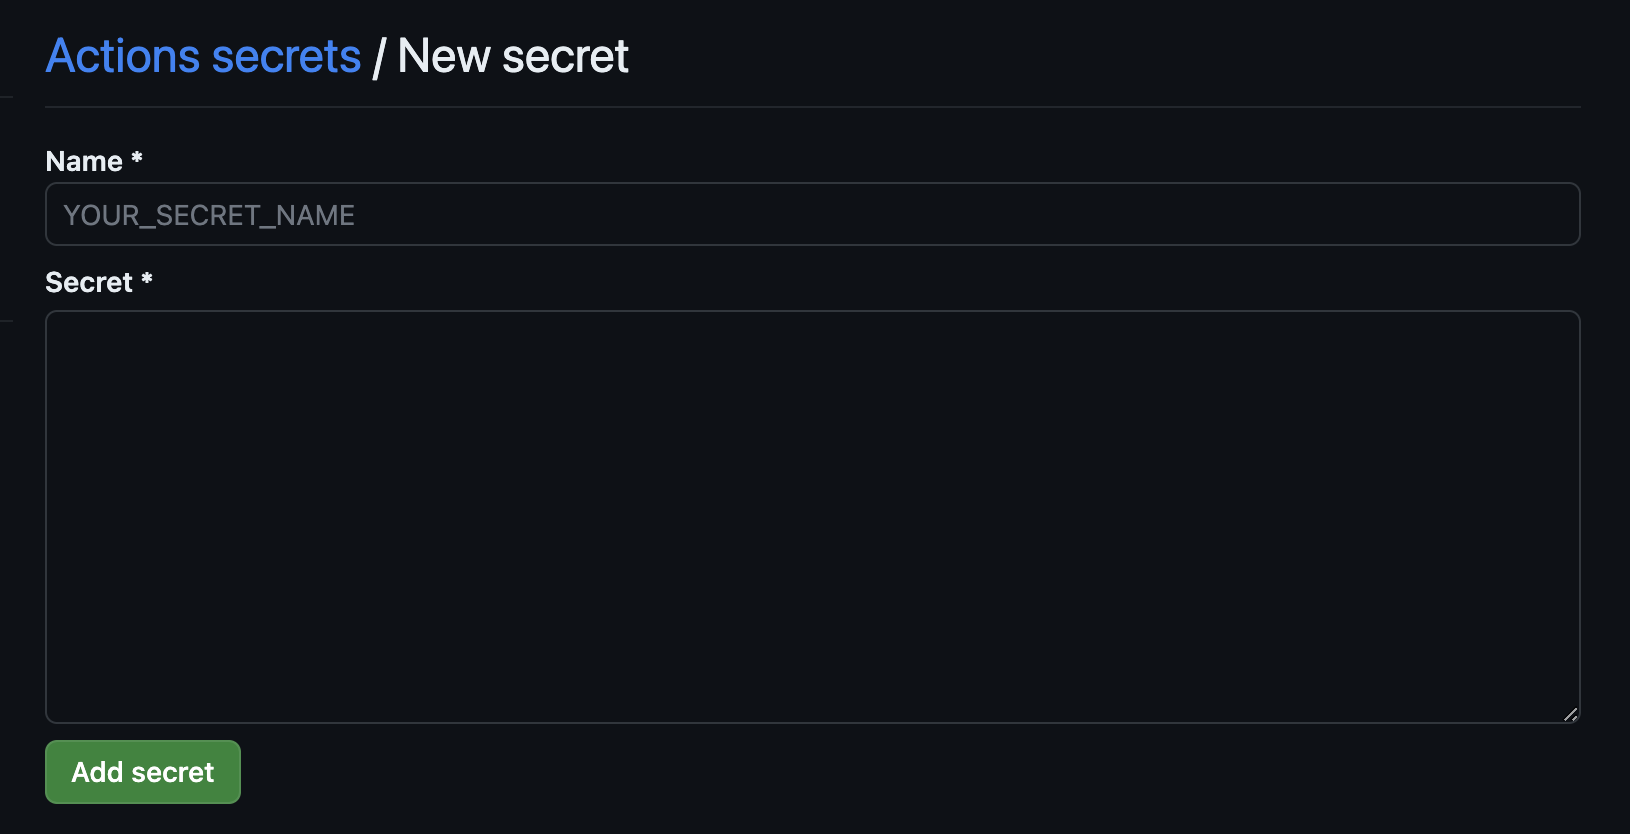 A screenshot of the Actions secrets/New secret page in Github